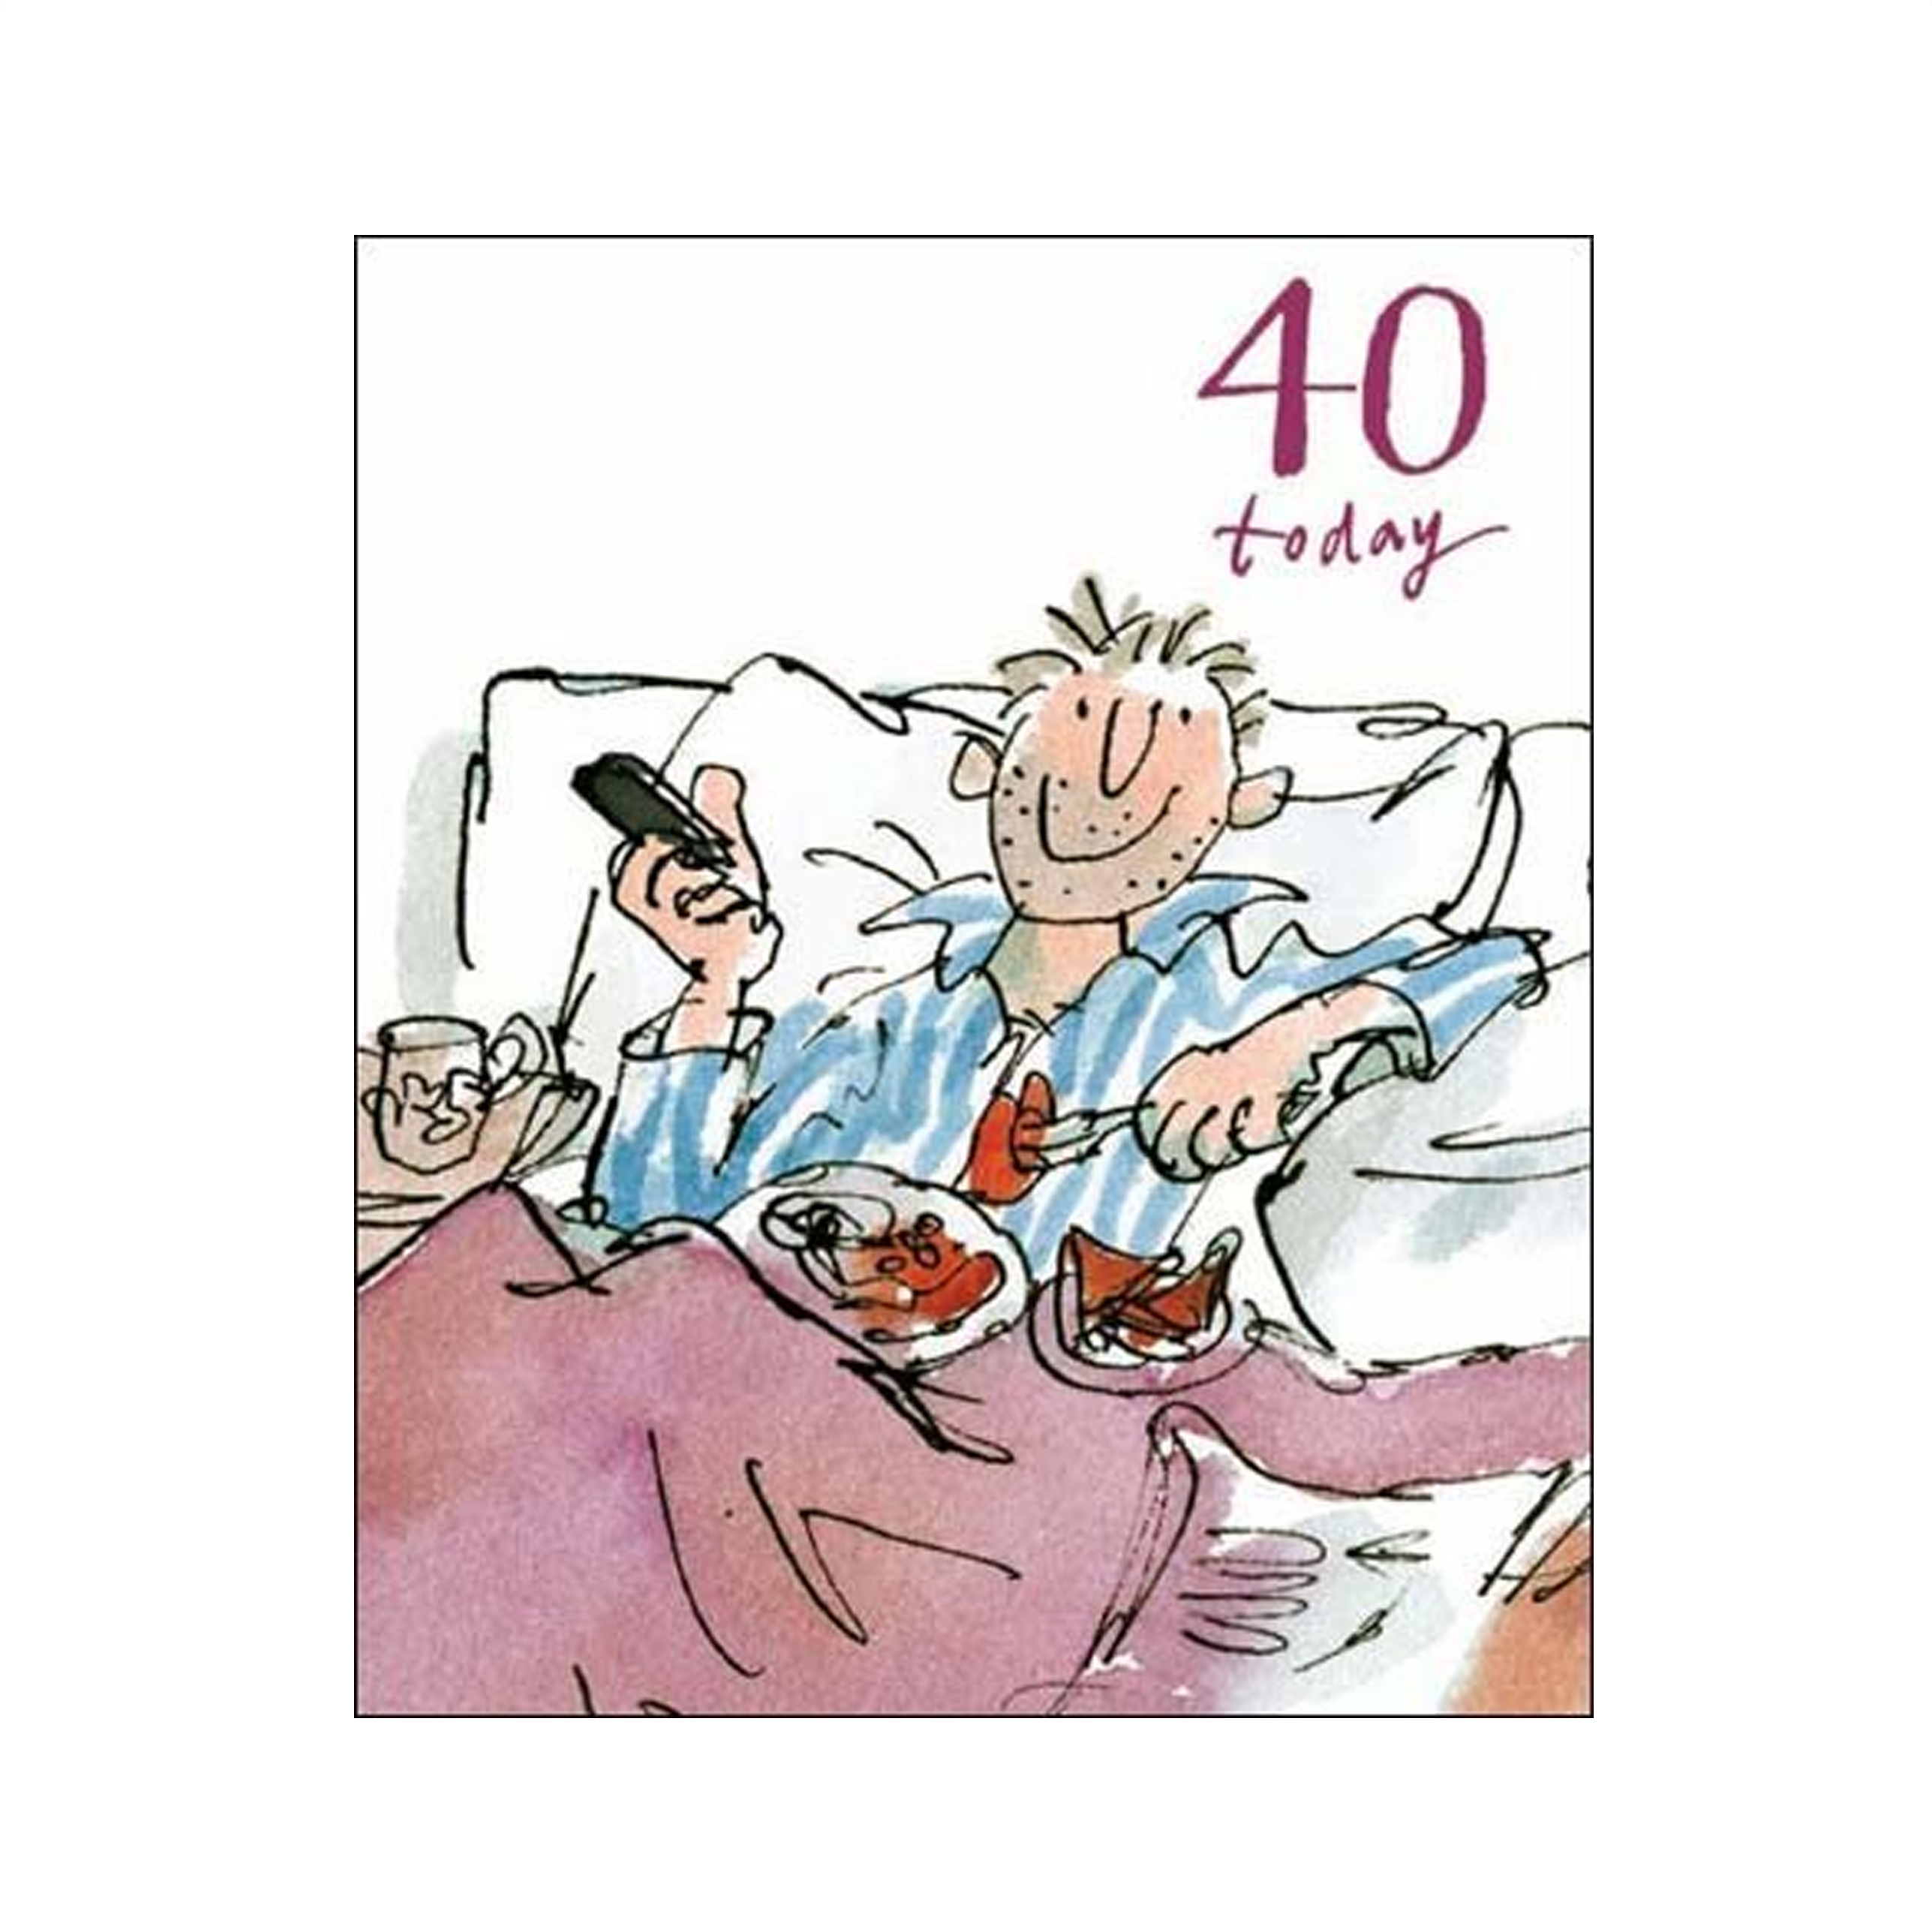 40Th Birthday Card Ideas For Men Breakfast In Bed Male 40th Birthday Card Quentin Blake